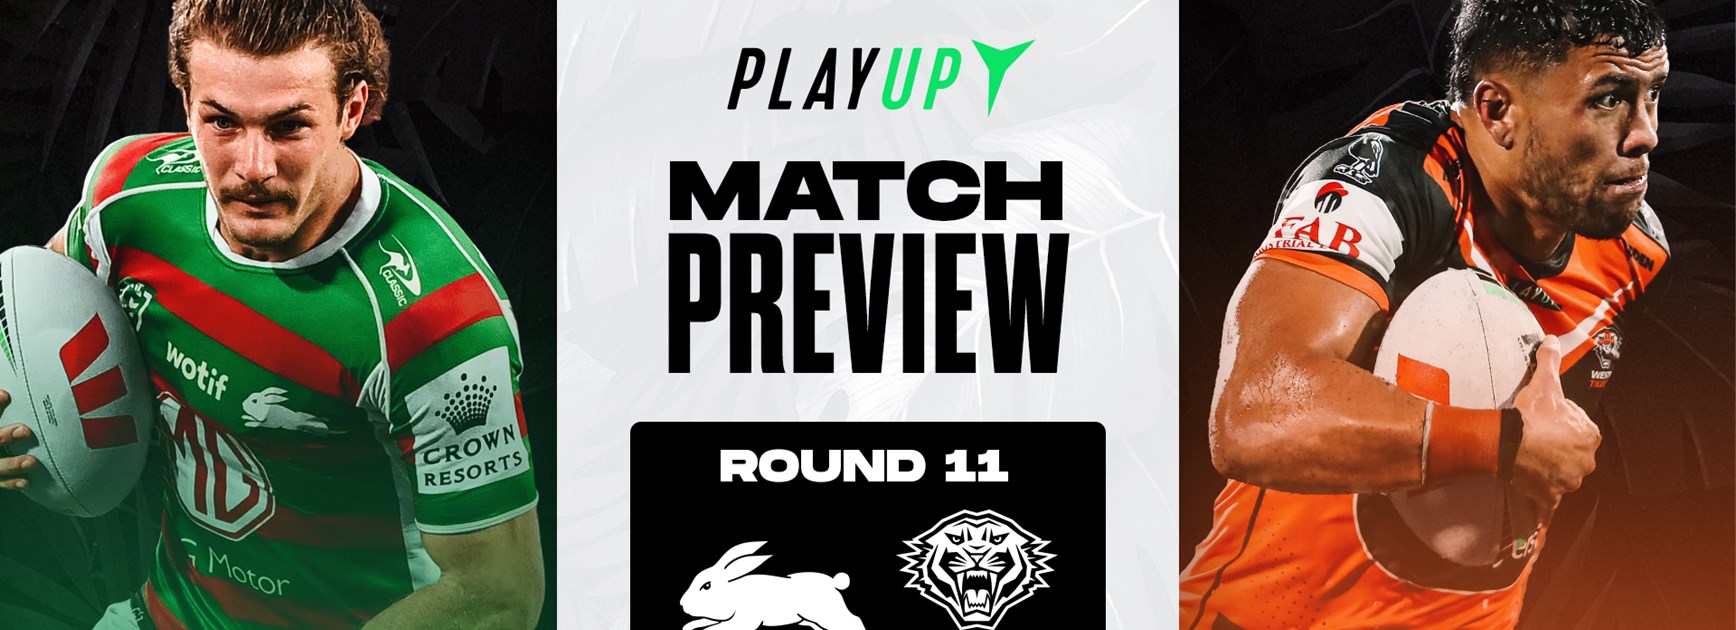 Match Preview: Round 11 vs Rabbitohs